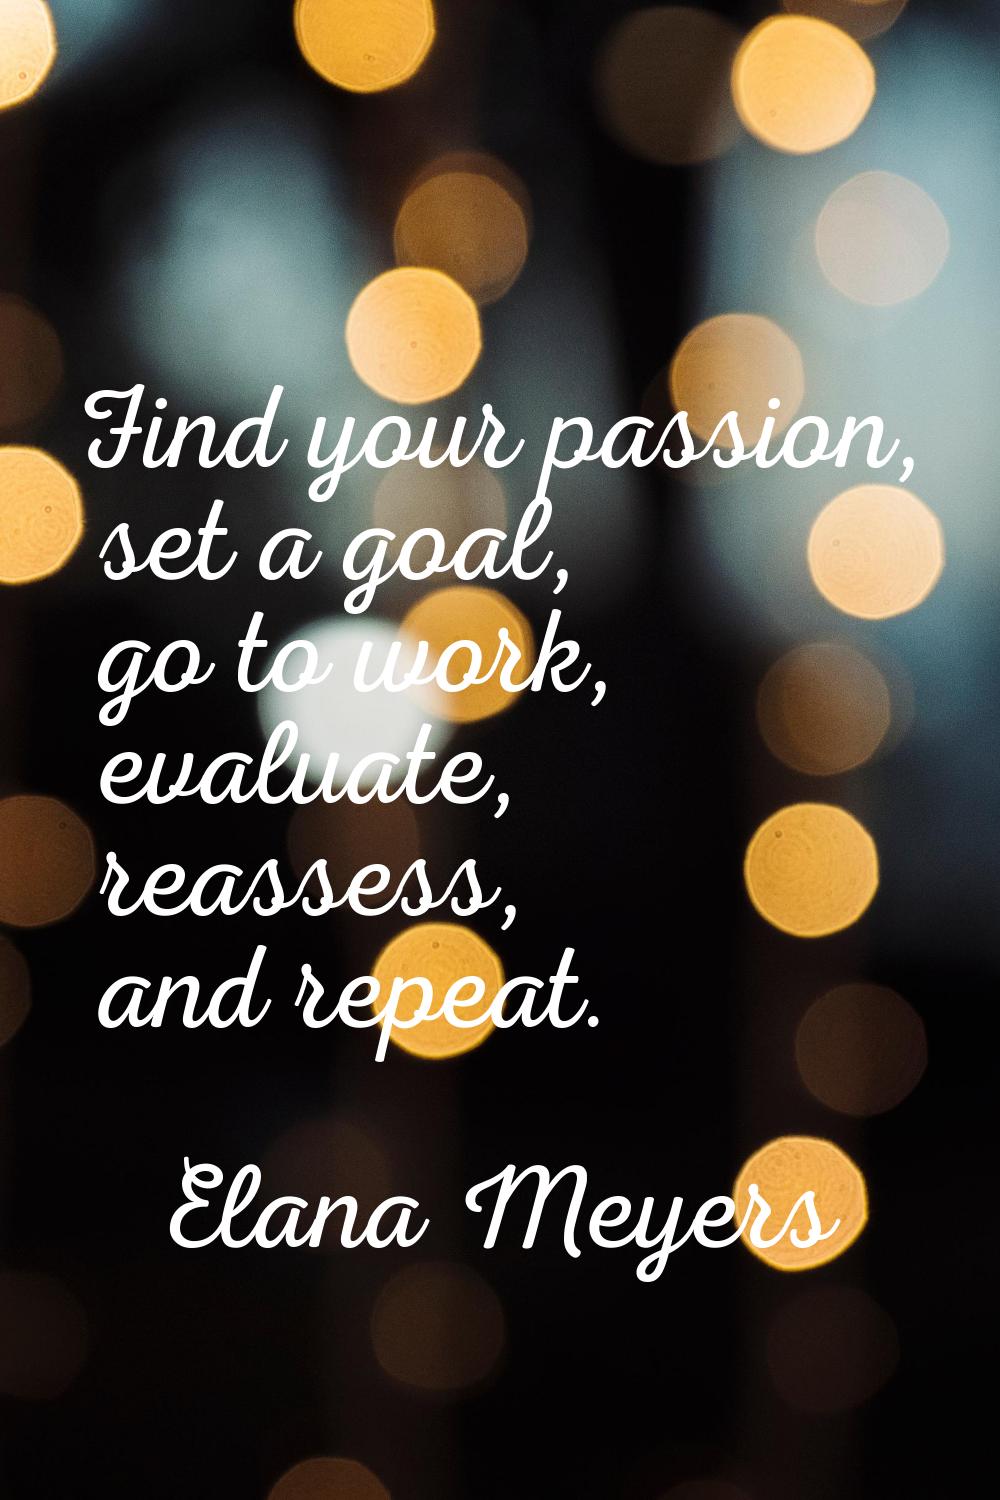 Find your passion, set a goal, go to work, evaluate, reassess, and repeat.